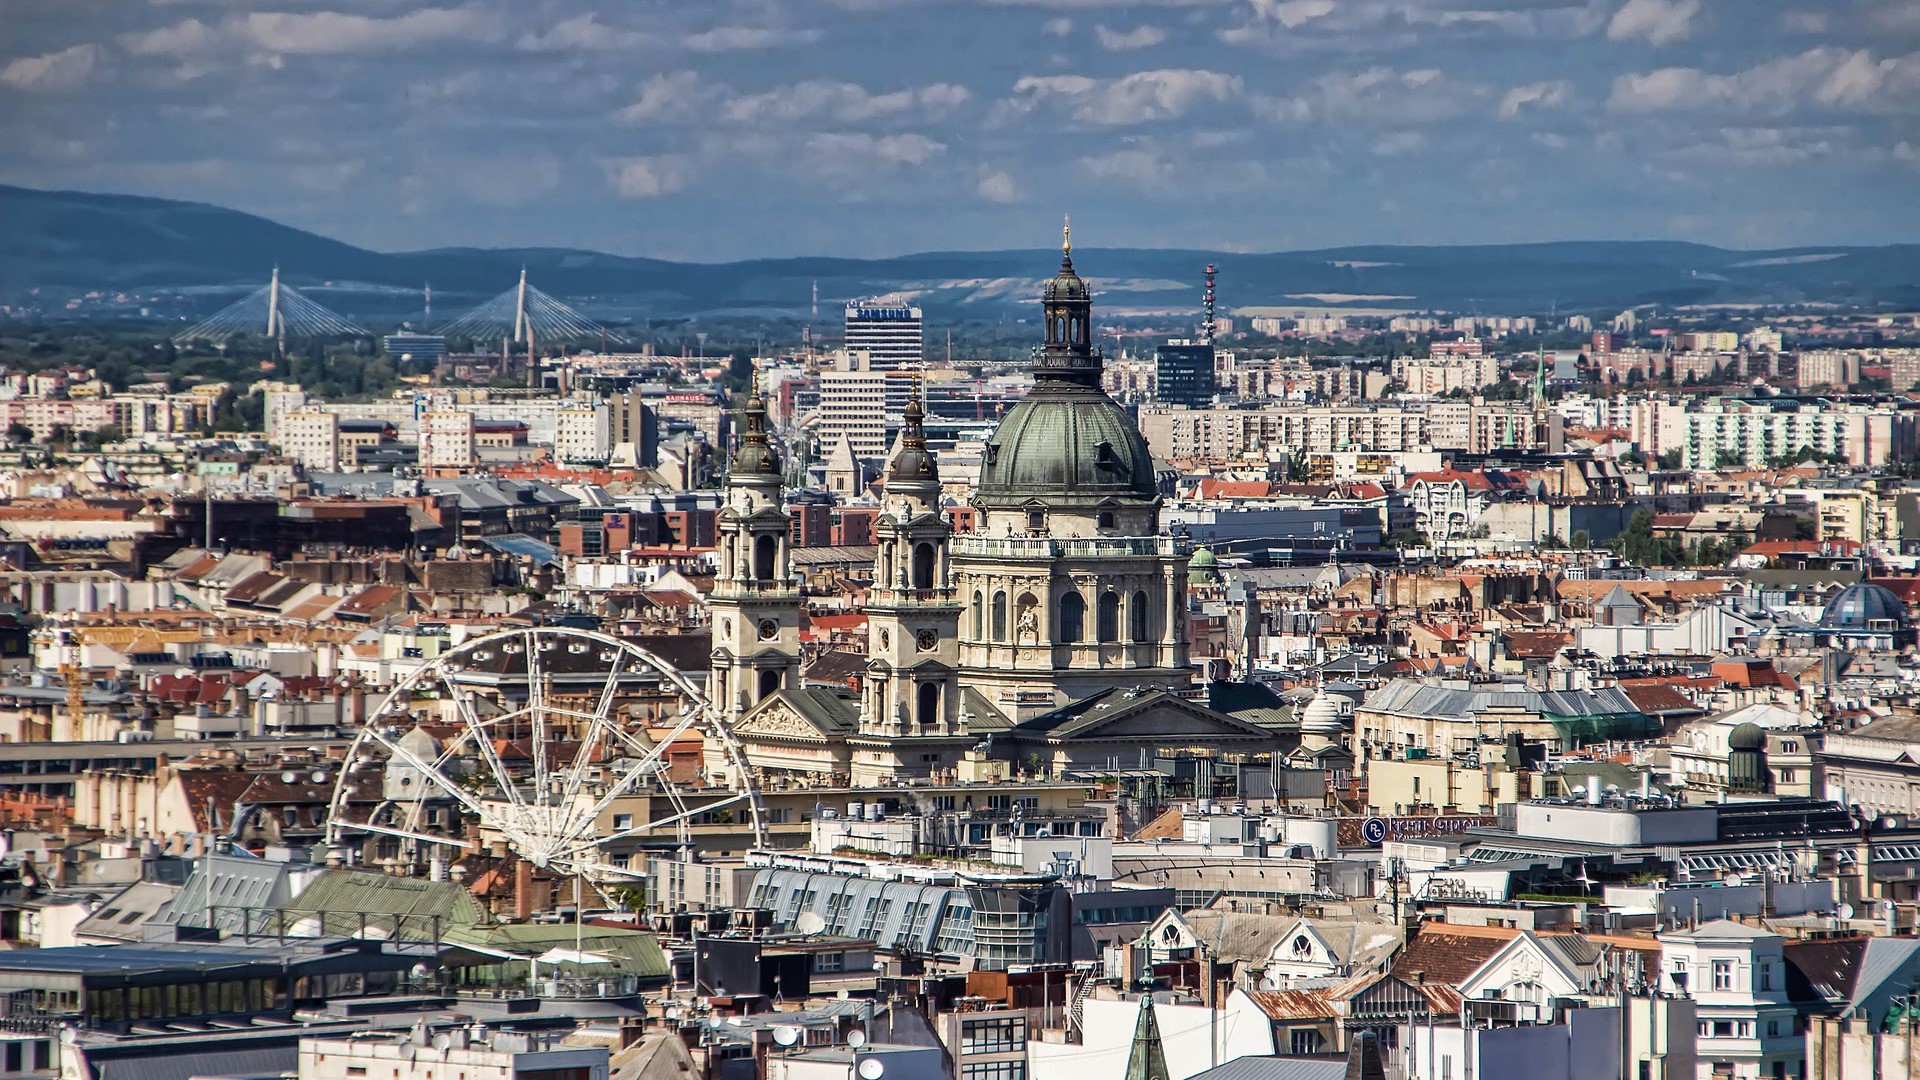 Average Square Meter Prices in Budapest Exceed EUR 3,400